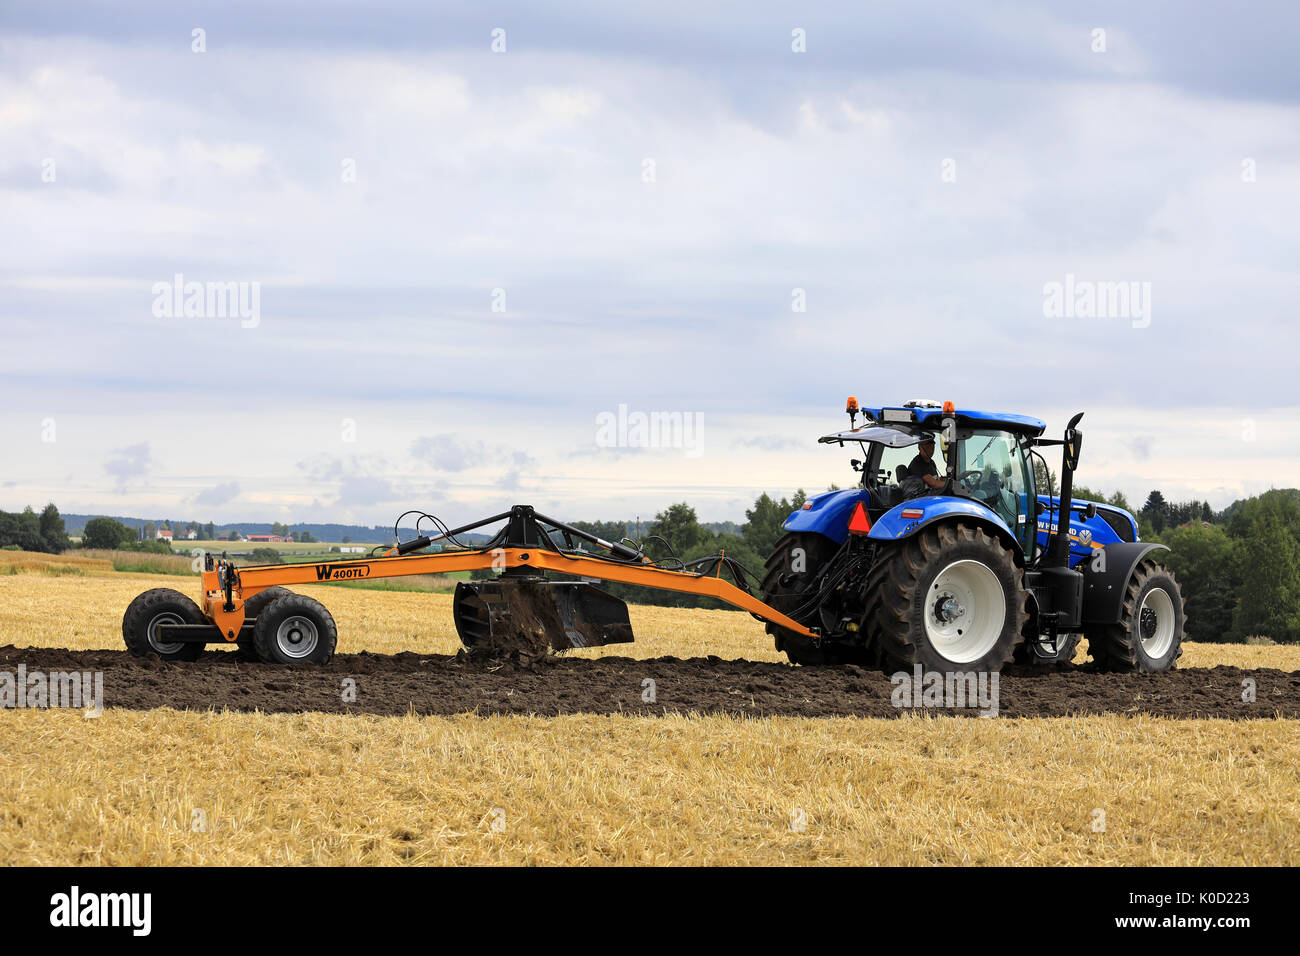 Leveling Field Stock Photos & Leveling Field Stock Images - Alamy